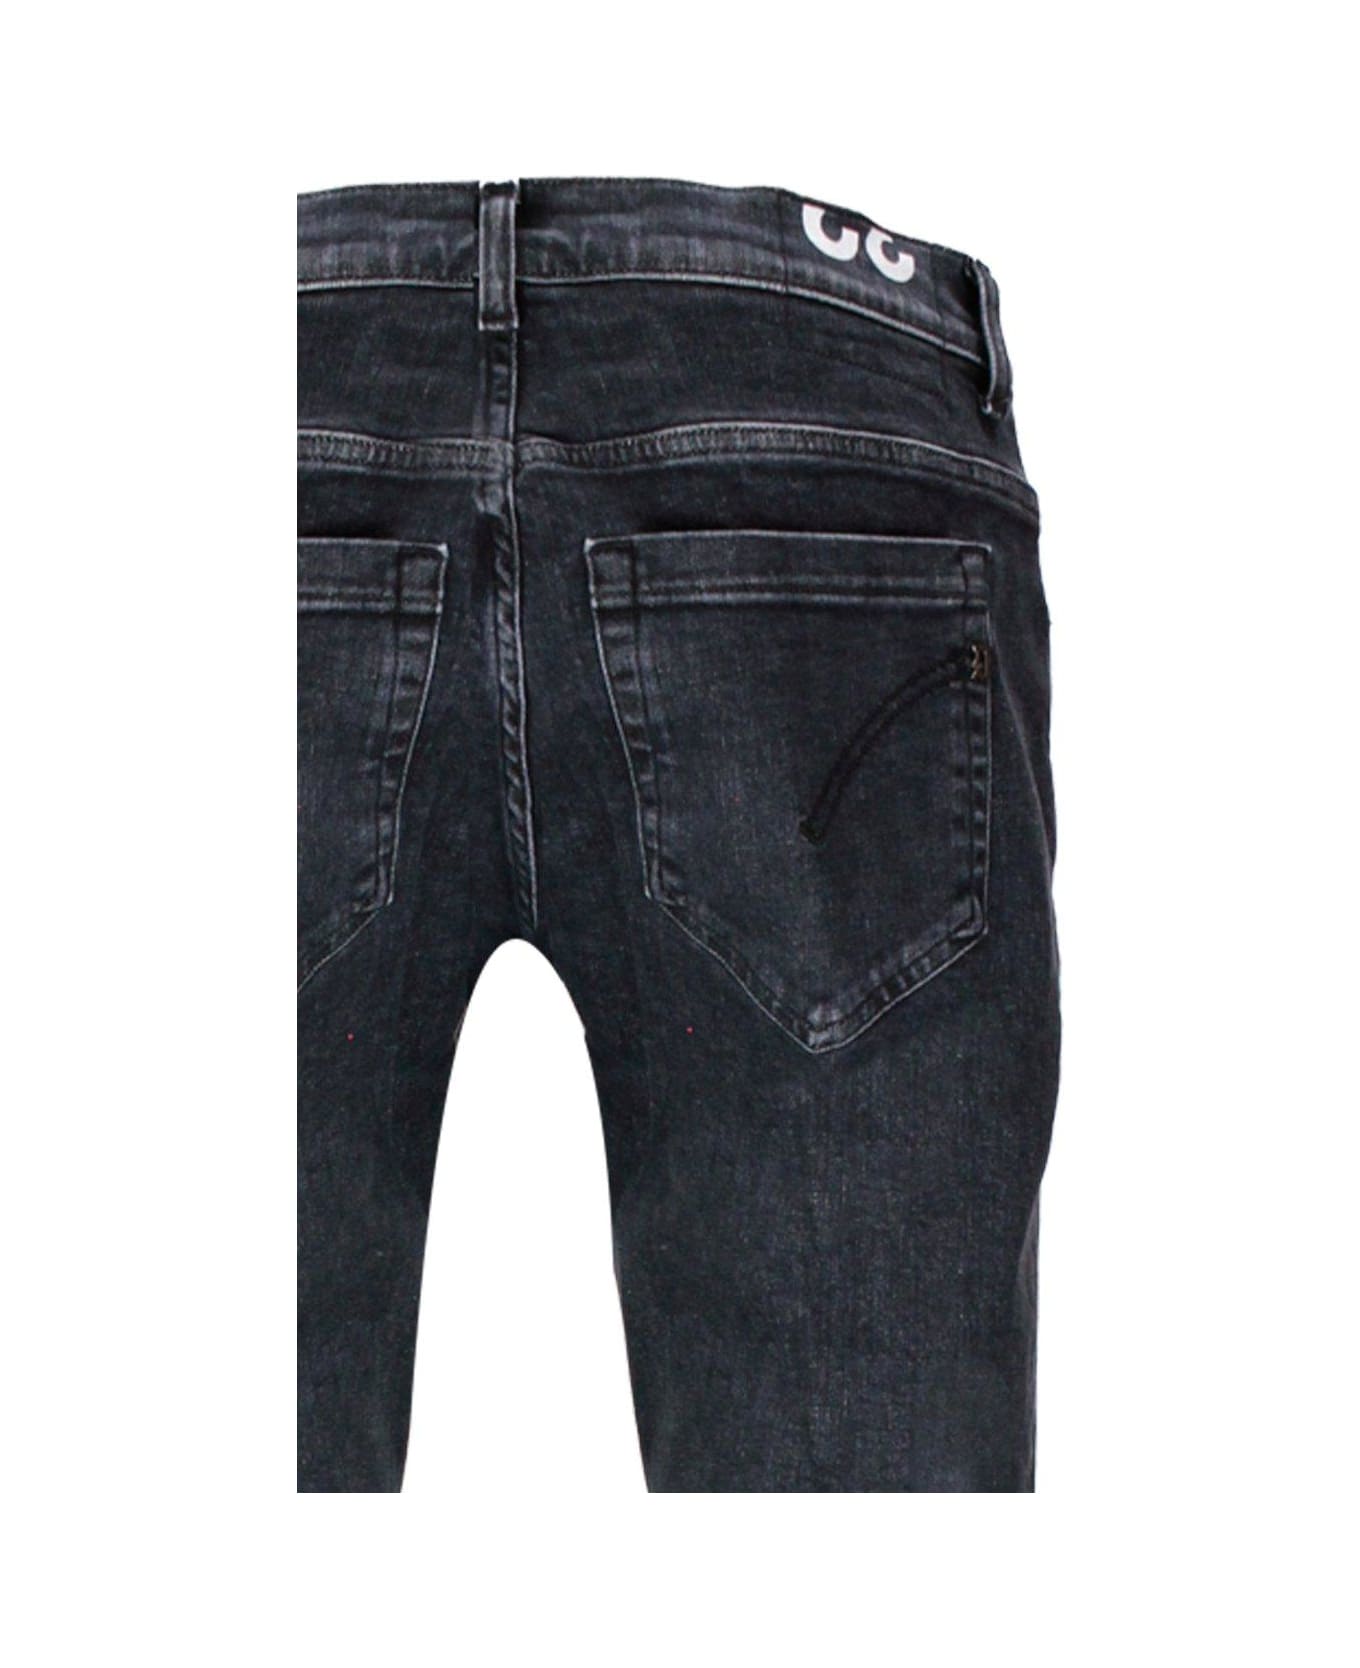 Dondup Turn-up Cuffs Stretched Jeans Dondup - BLACK デニム